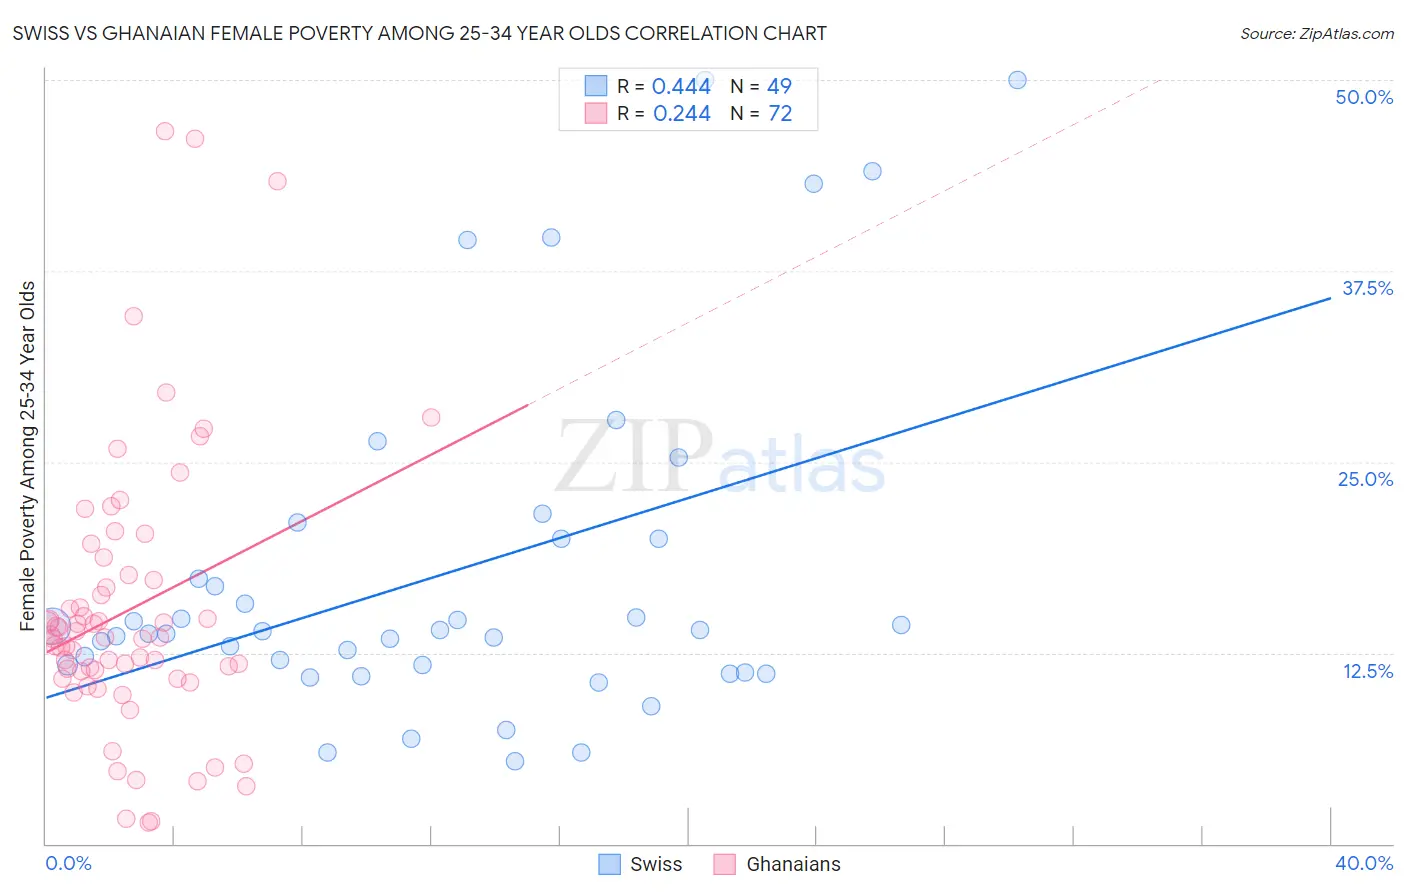 Swiss vs Ghanaian Female Poverty Among 25-34 Year Olds